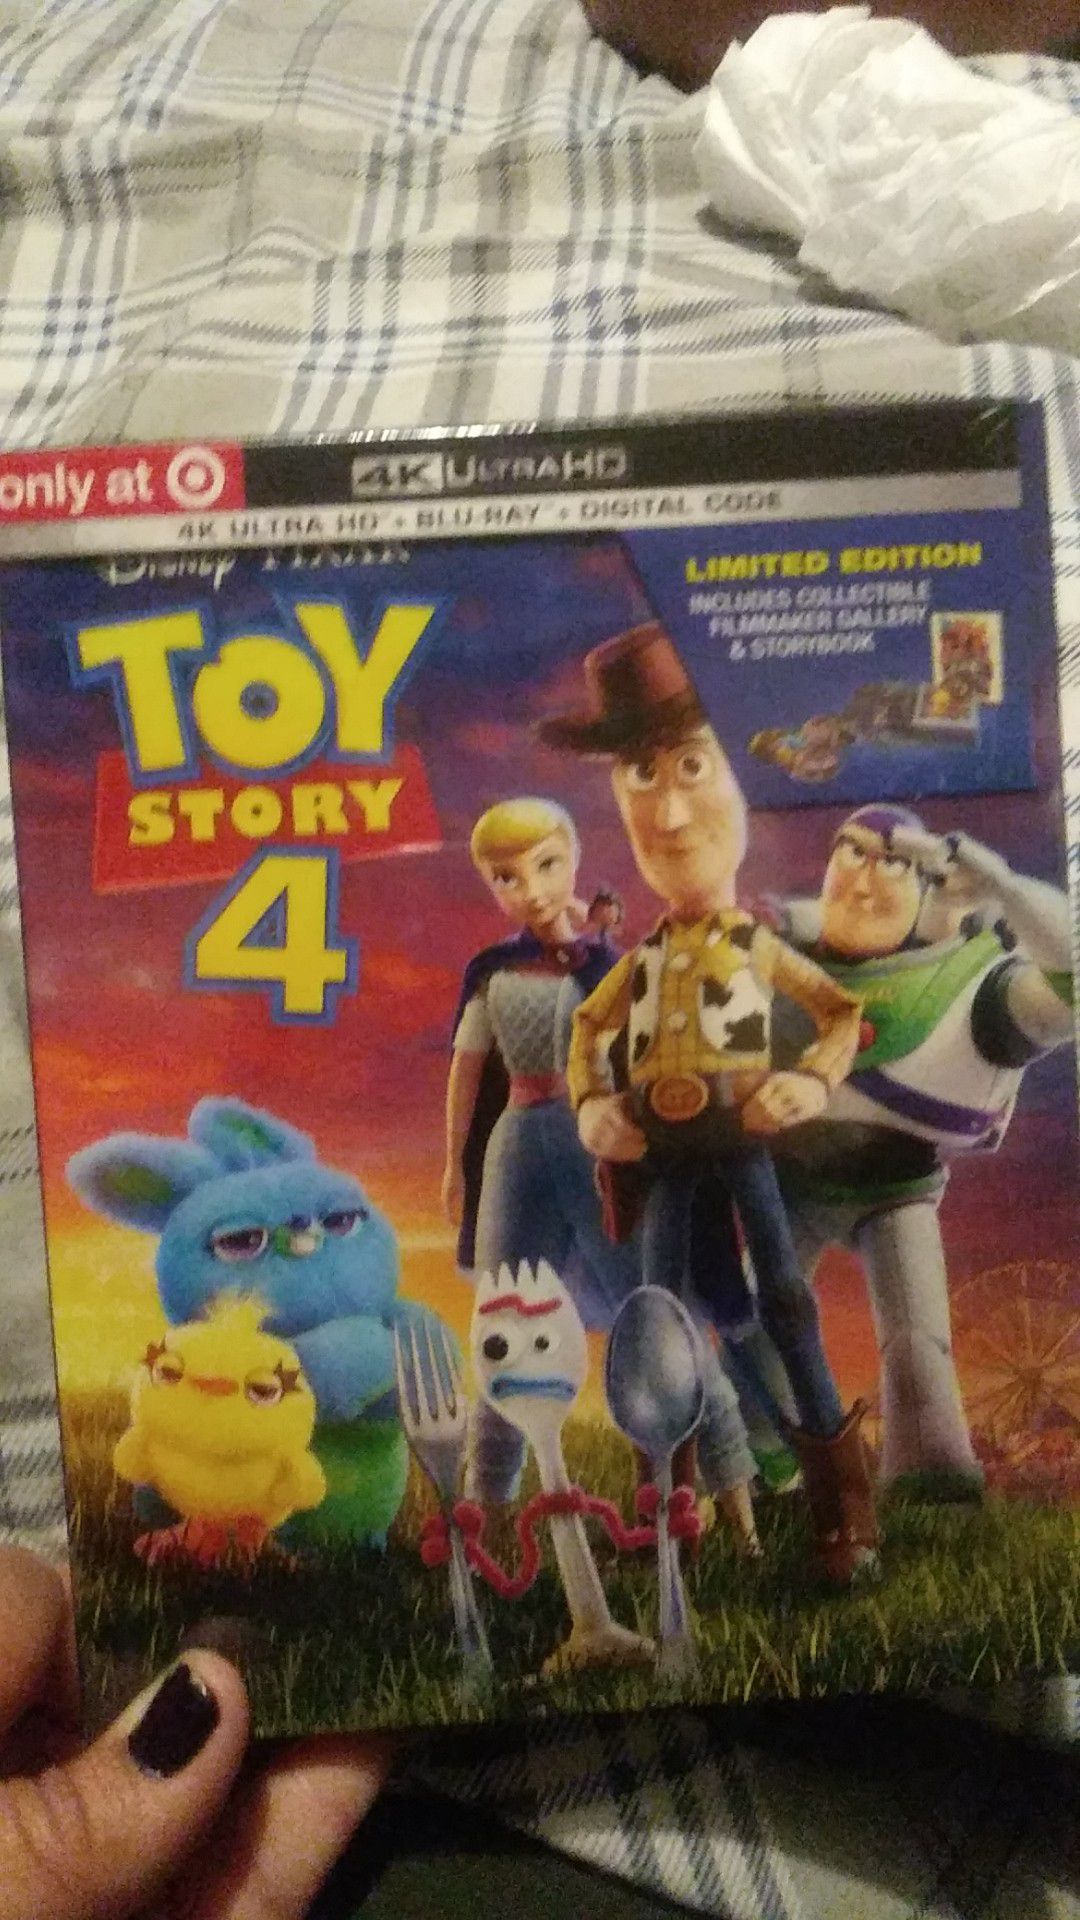 4k with storybook